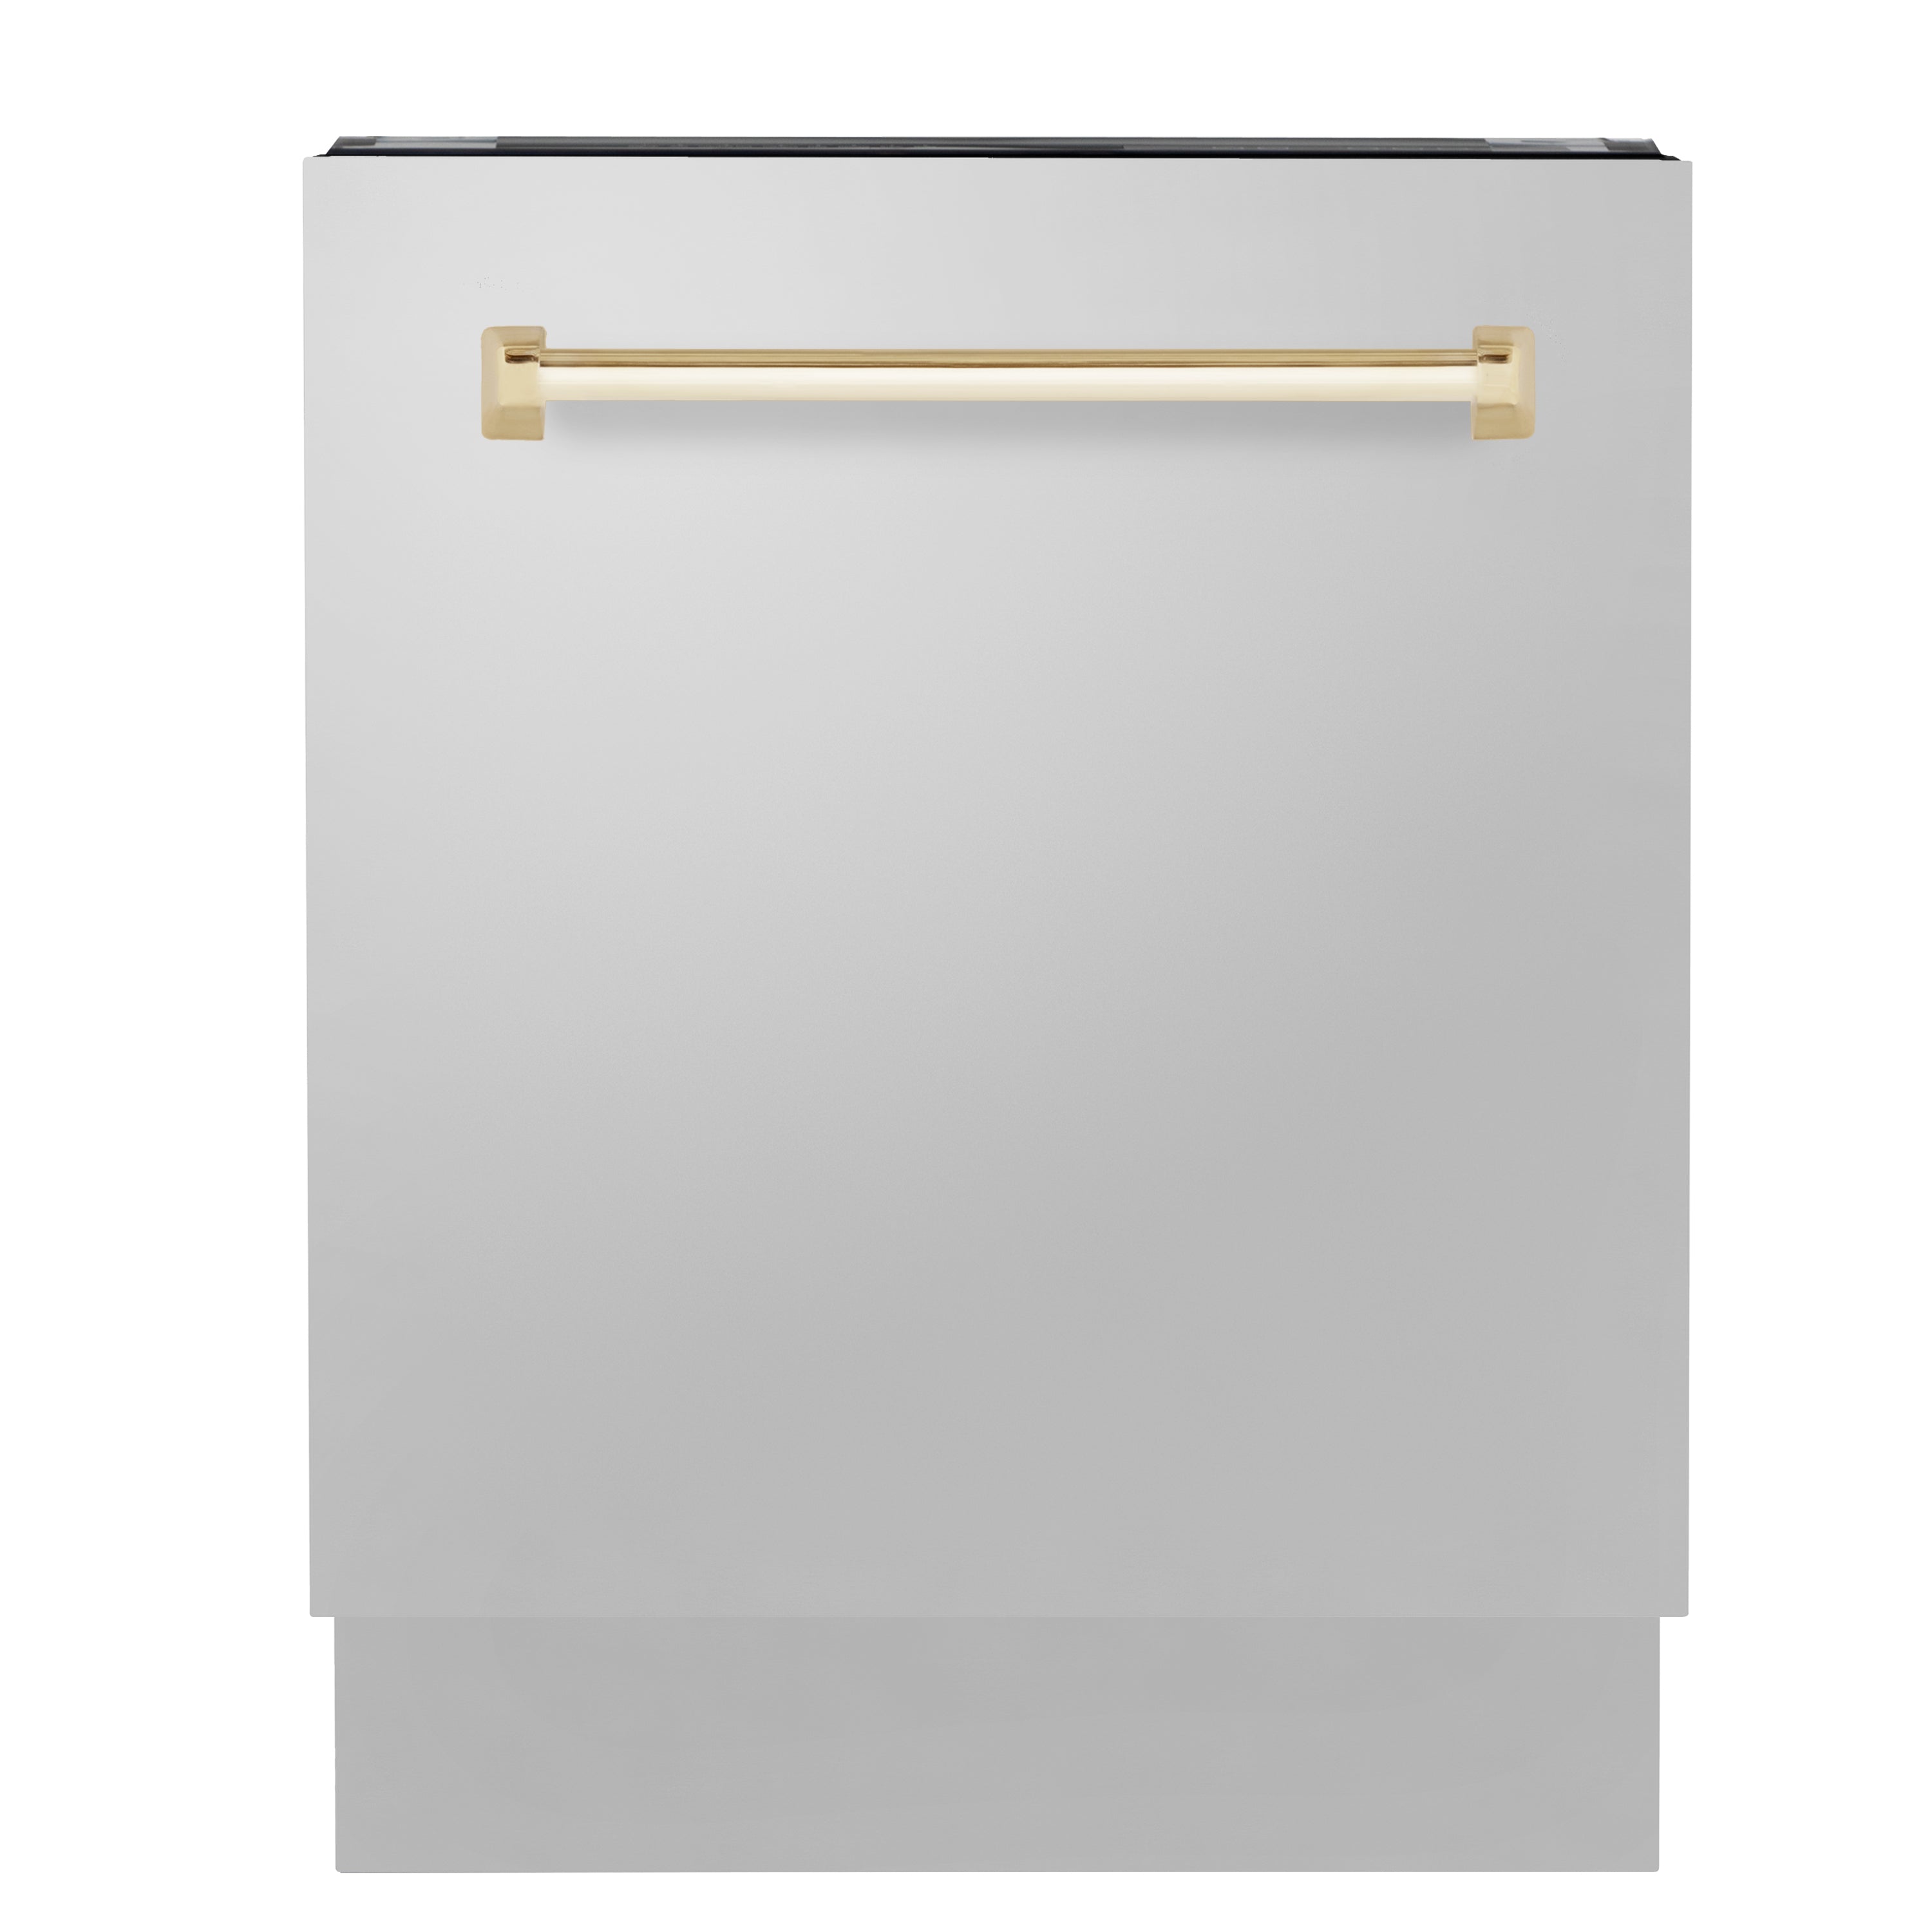 ZLINE Autograph Edition 24 in. 3rd Rack Top Control Tall Tub Dishwasher in Stainless Steel with Polished Gold Handle, 51dBa (DWVZ-304-24-G)